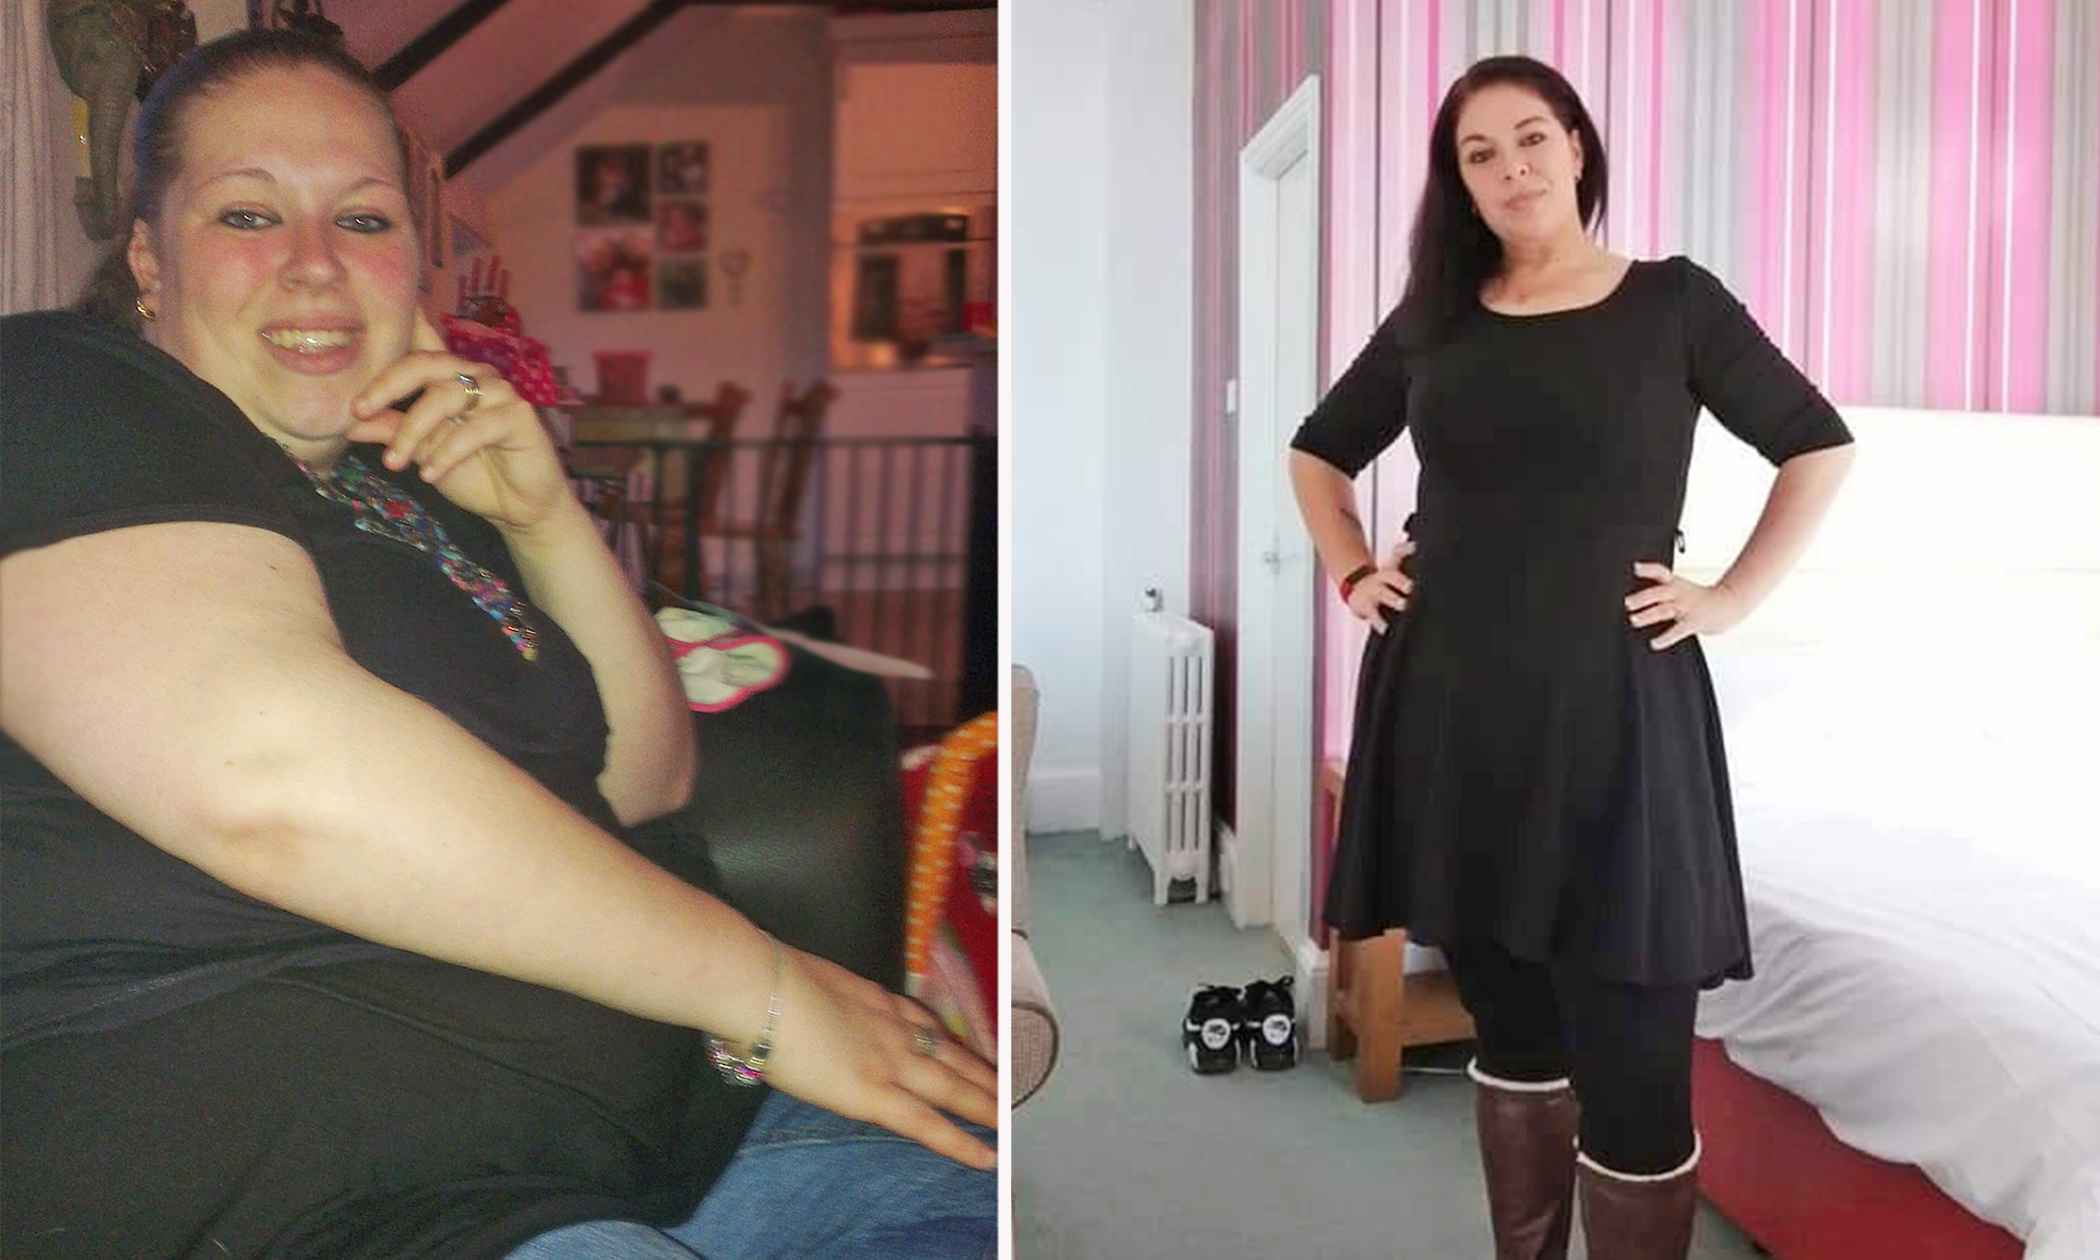 Size 28 mum sheds 10 stone after weight gain made her lost her